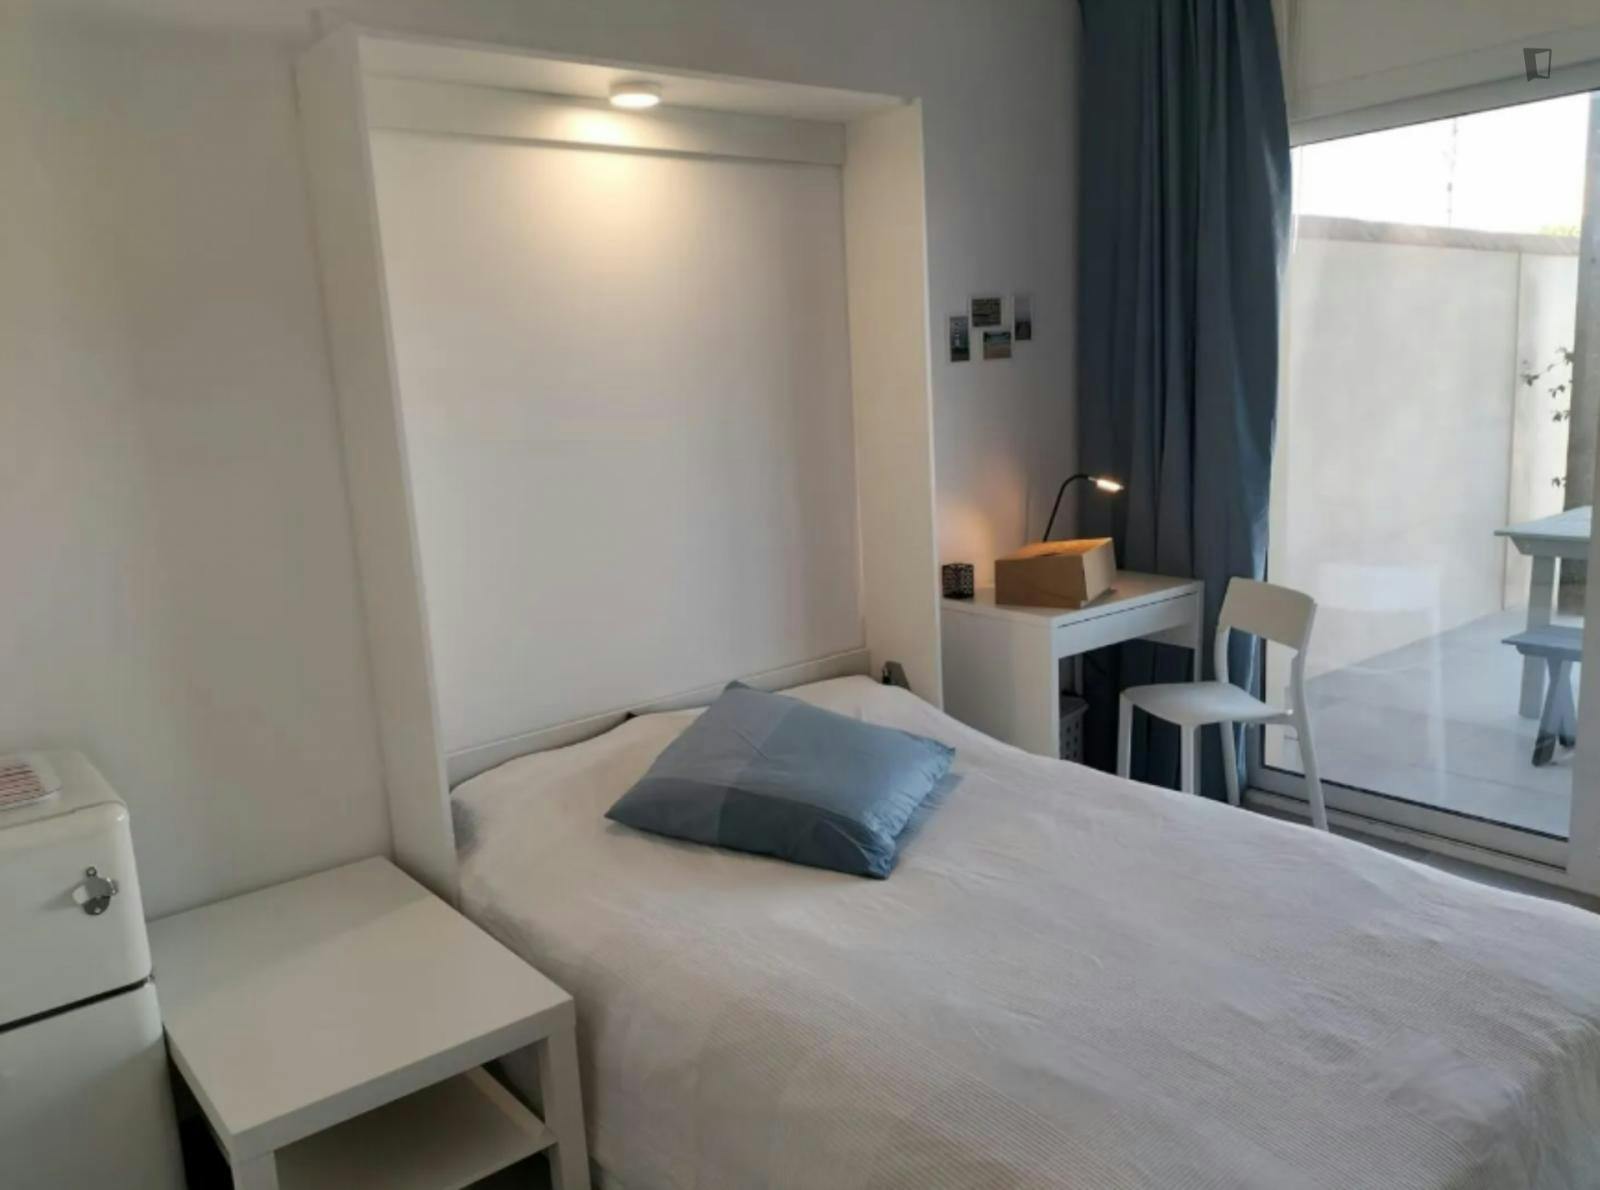 Comfy double ensuite bedroom in a 16-bedroom apartment not far from Bernard Magrez Cultural Institute